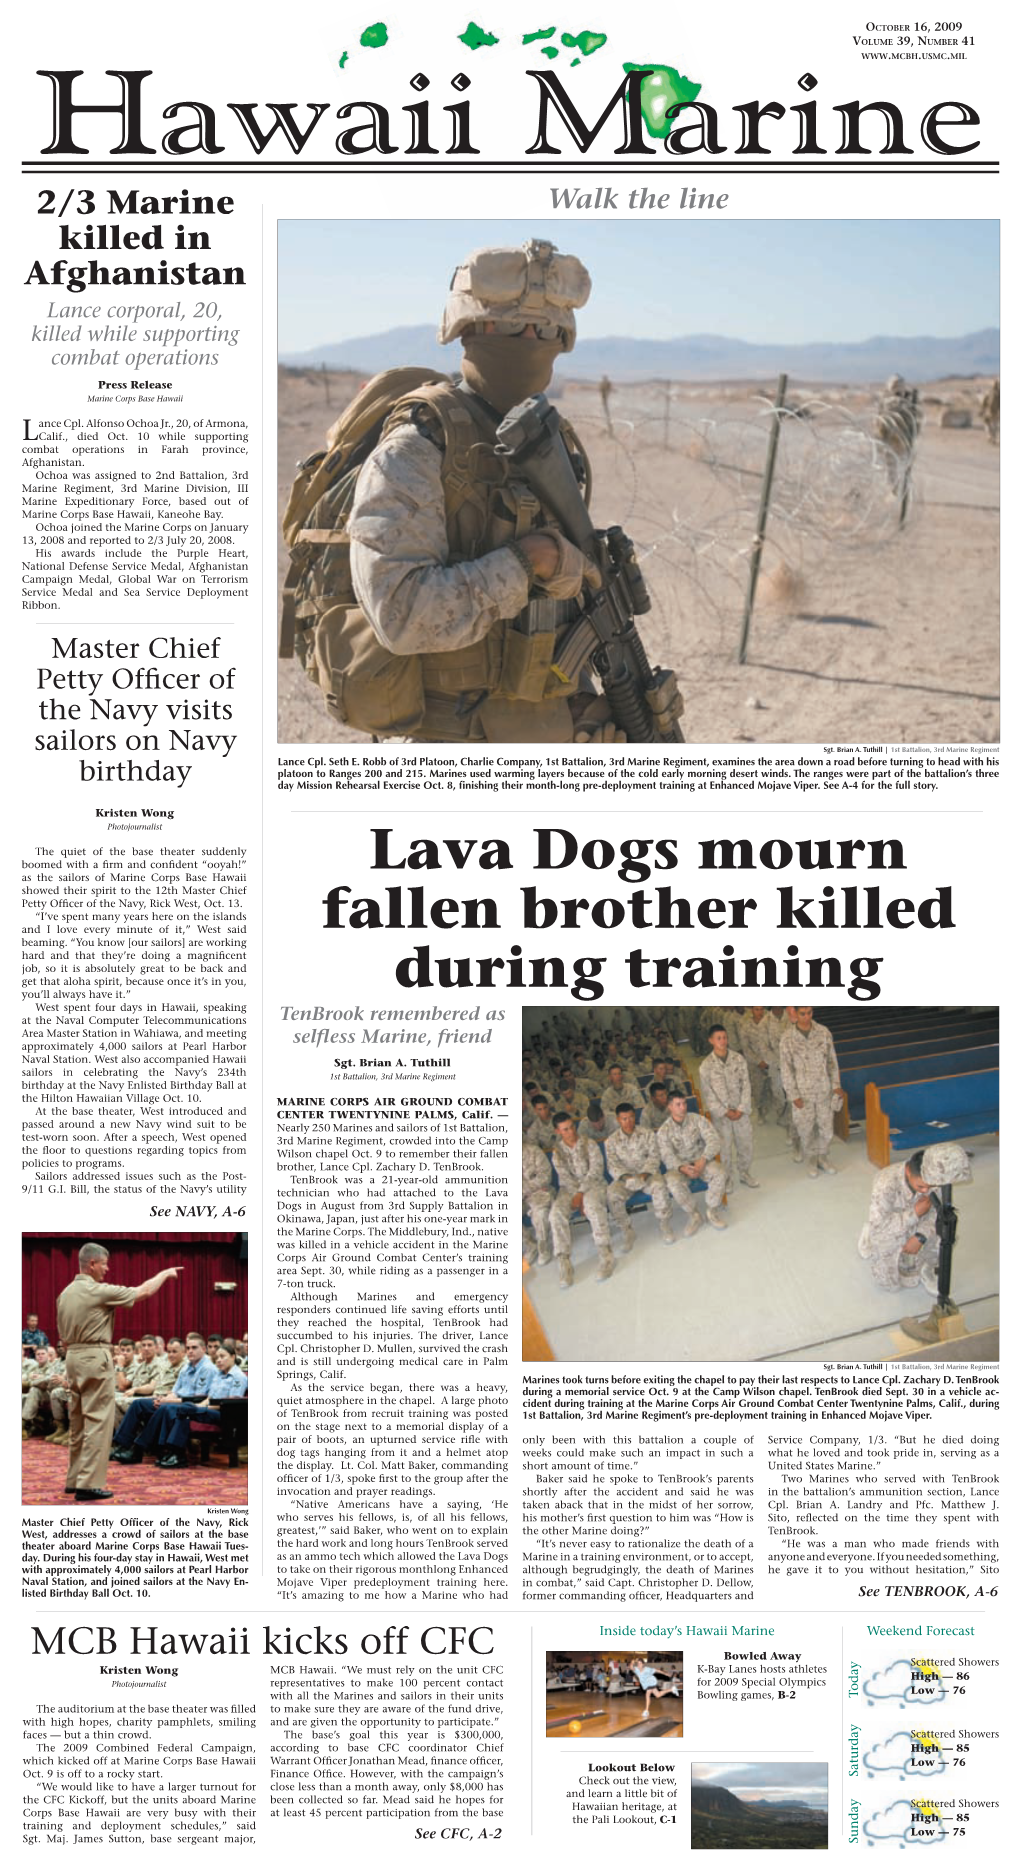 Lava Dogs Mourn Fallen Brother Killed During Training